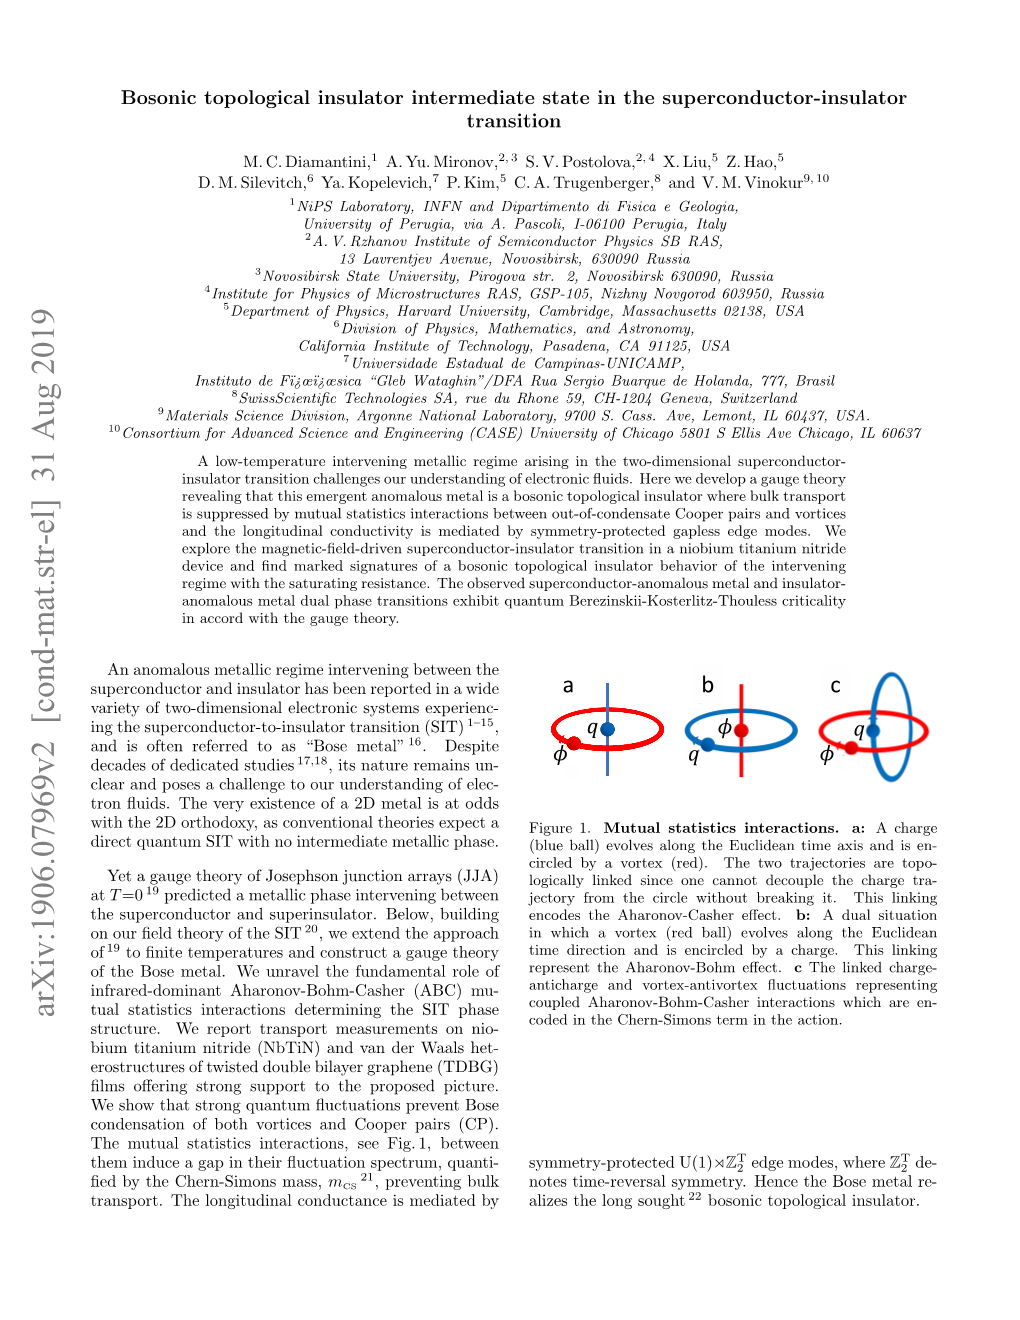 Arxiv:1906.07969V2 [Cond-Mat.Str-El] 31 Aug 2019 Tual Statistics Interactions Determining the SIT Phase Coded in the Chern-Simons Term in the Action